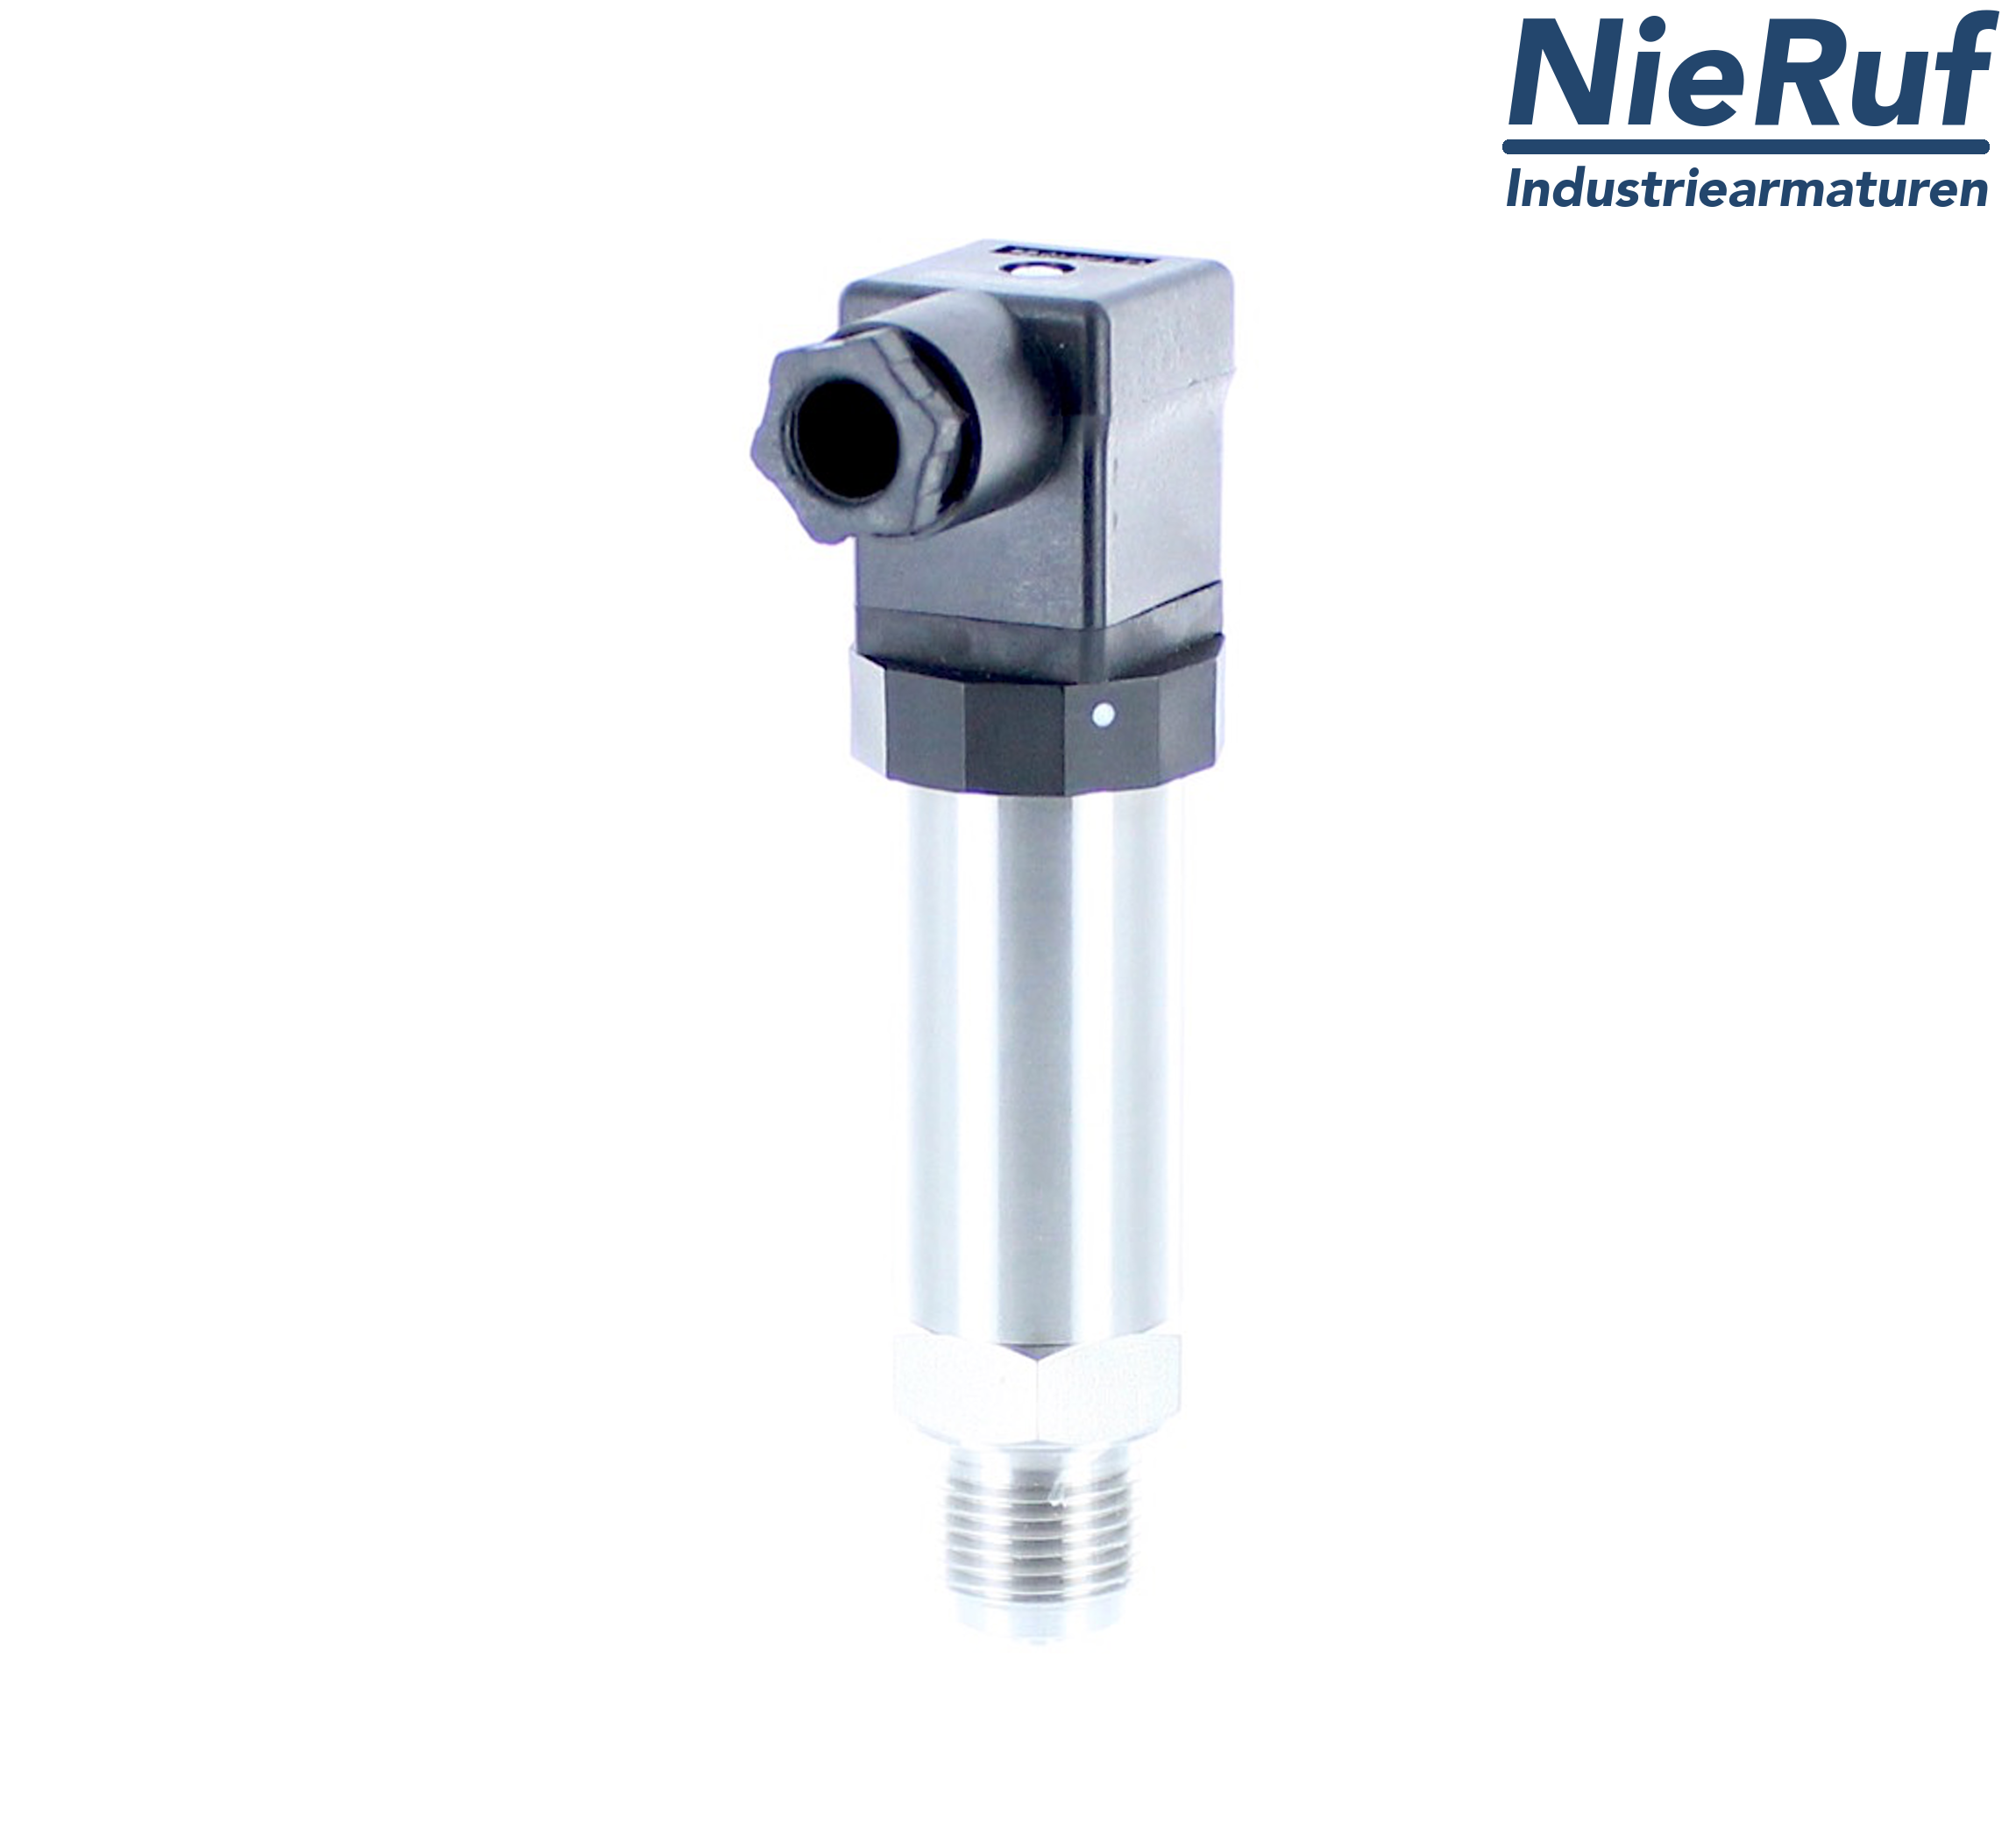 pressure sensor G 1/2" B DS01 stainless steel 2-wire: 4-20mA FPM 0,0 - 250,0 bar